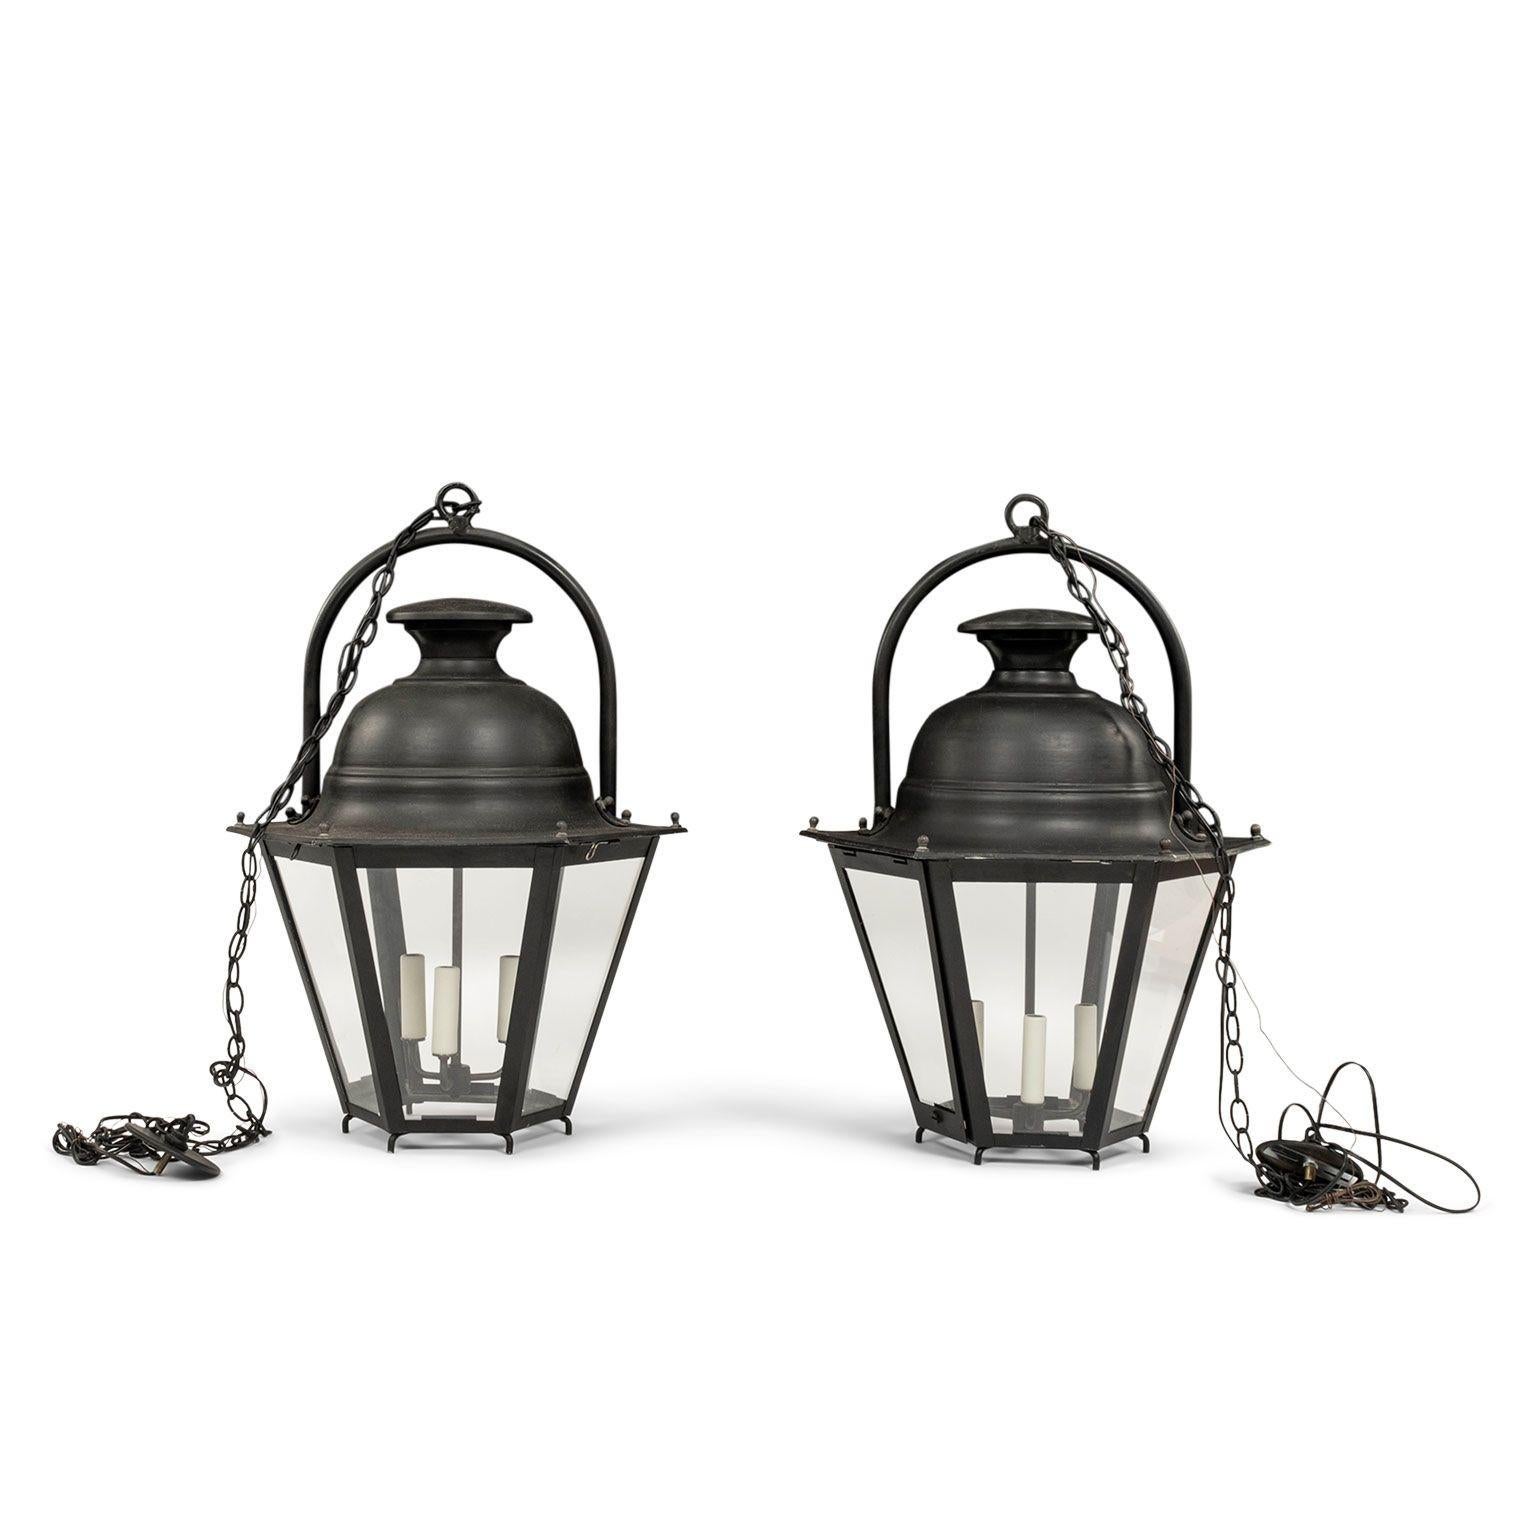 Black-painted hexagonal street lantern from the South of France. Newly wired for use within the USA using UL listed parts. Includes chain and canopy (listed height does not include chain). Two available and sold separately priced $4,800 each.

Note: